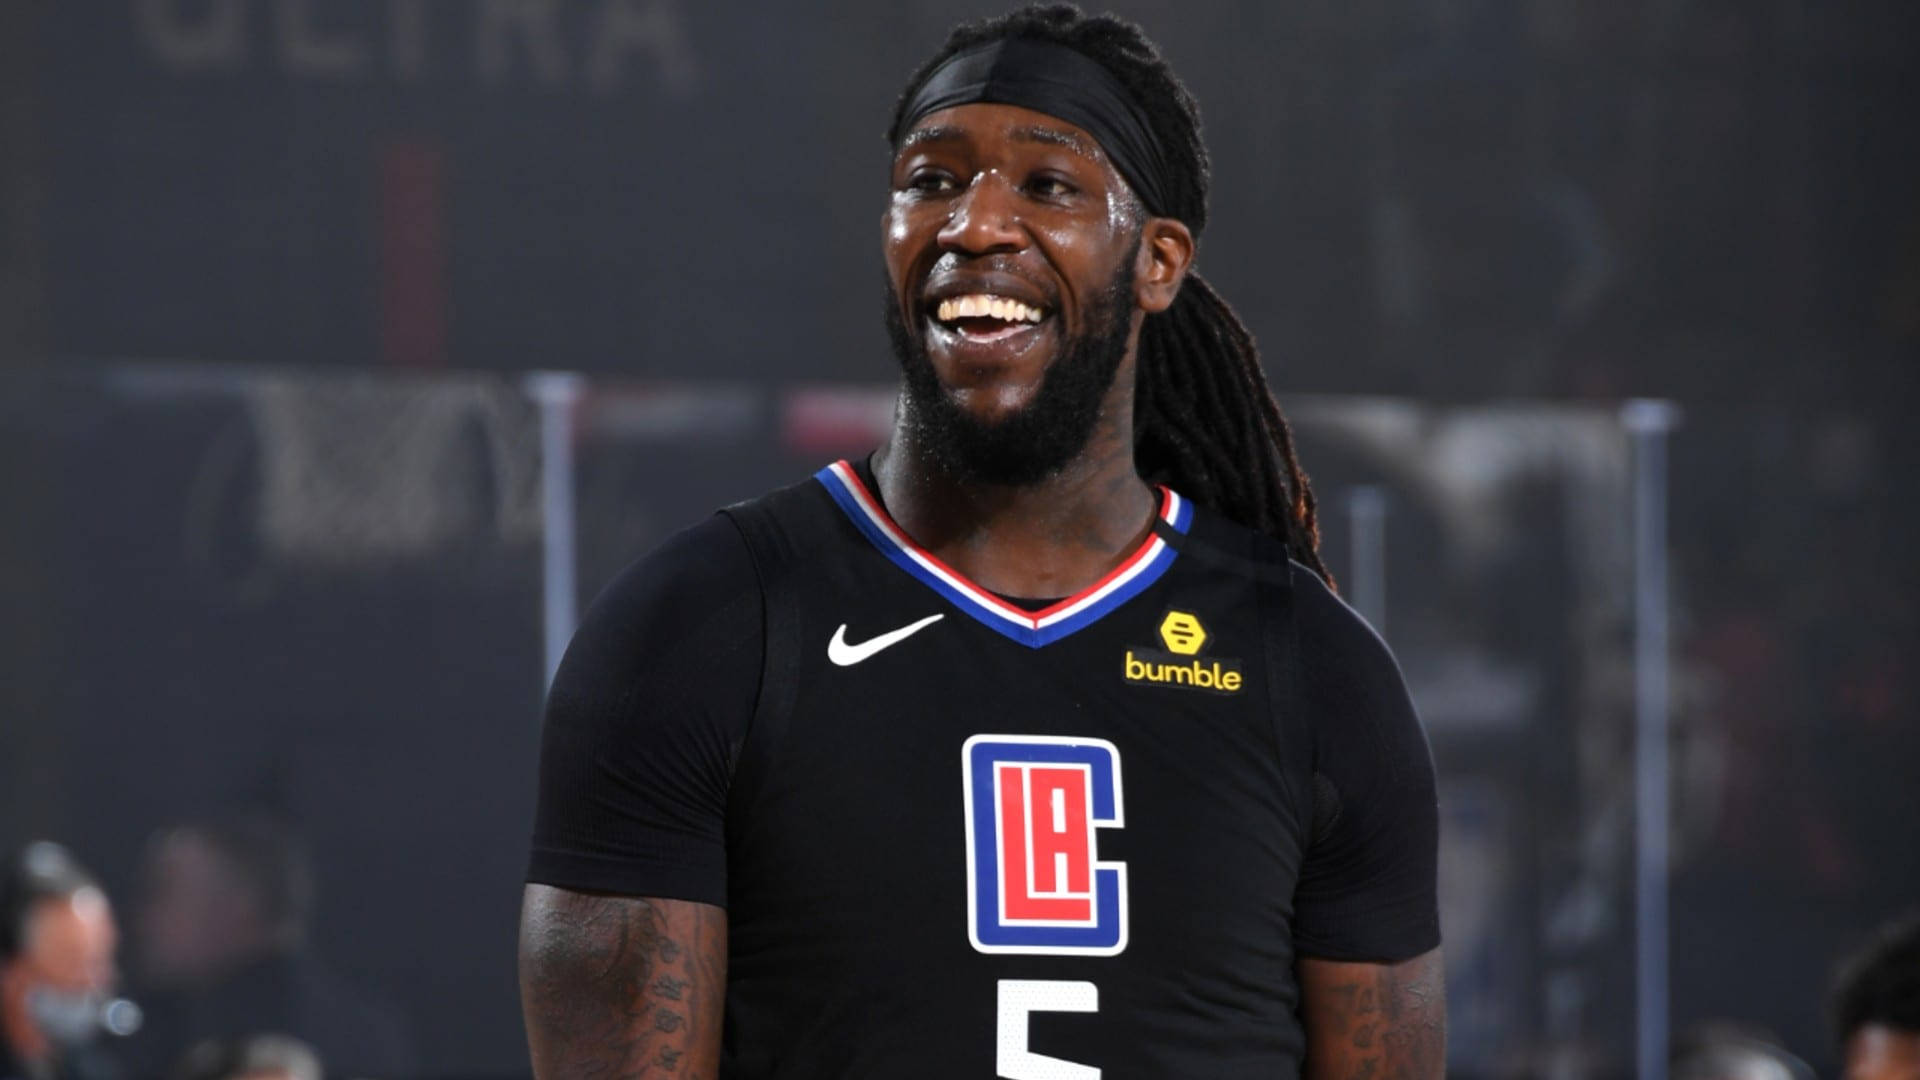 Smiling Montrezl Harrell, player of the Clippers, during a game Wallpaper